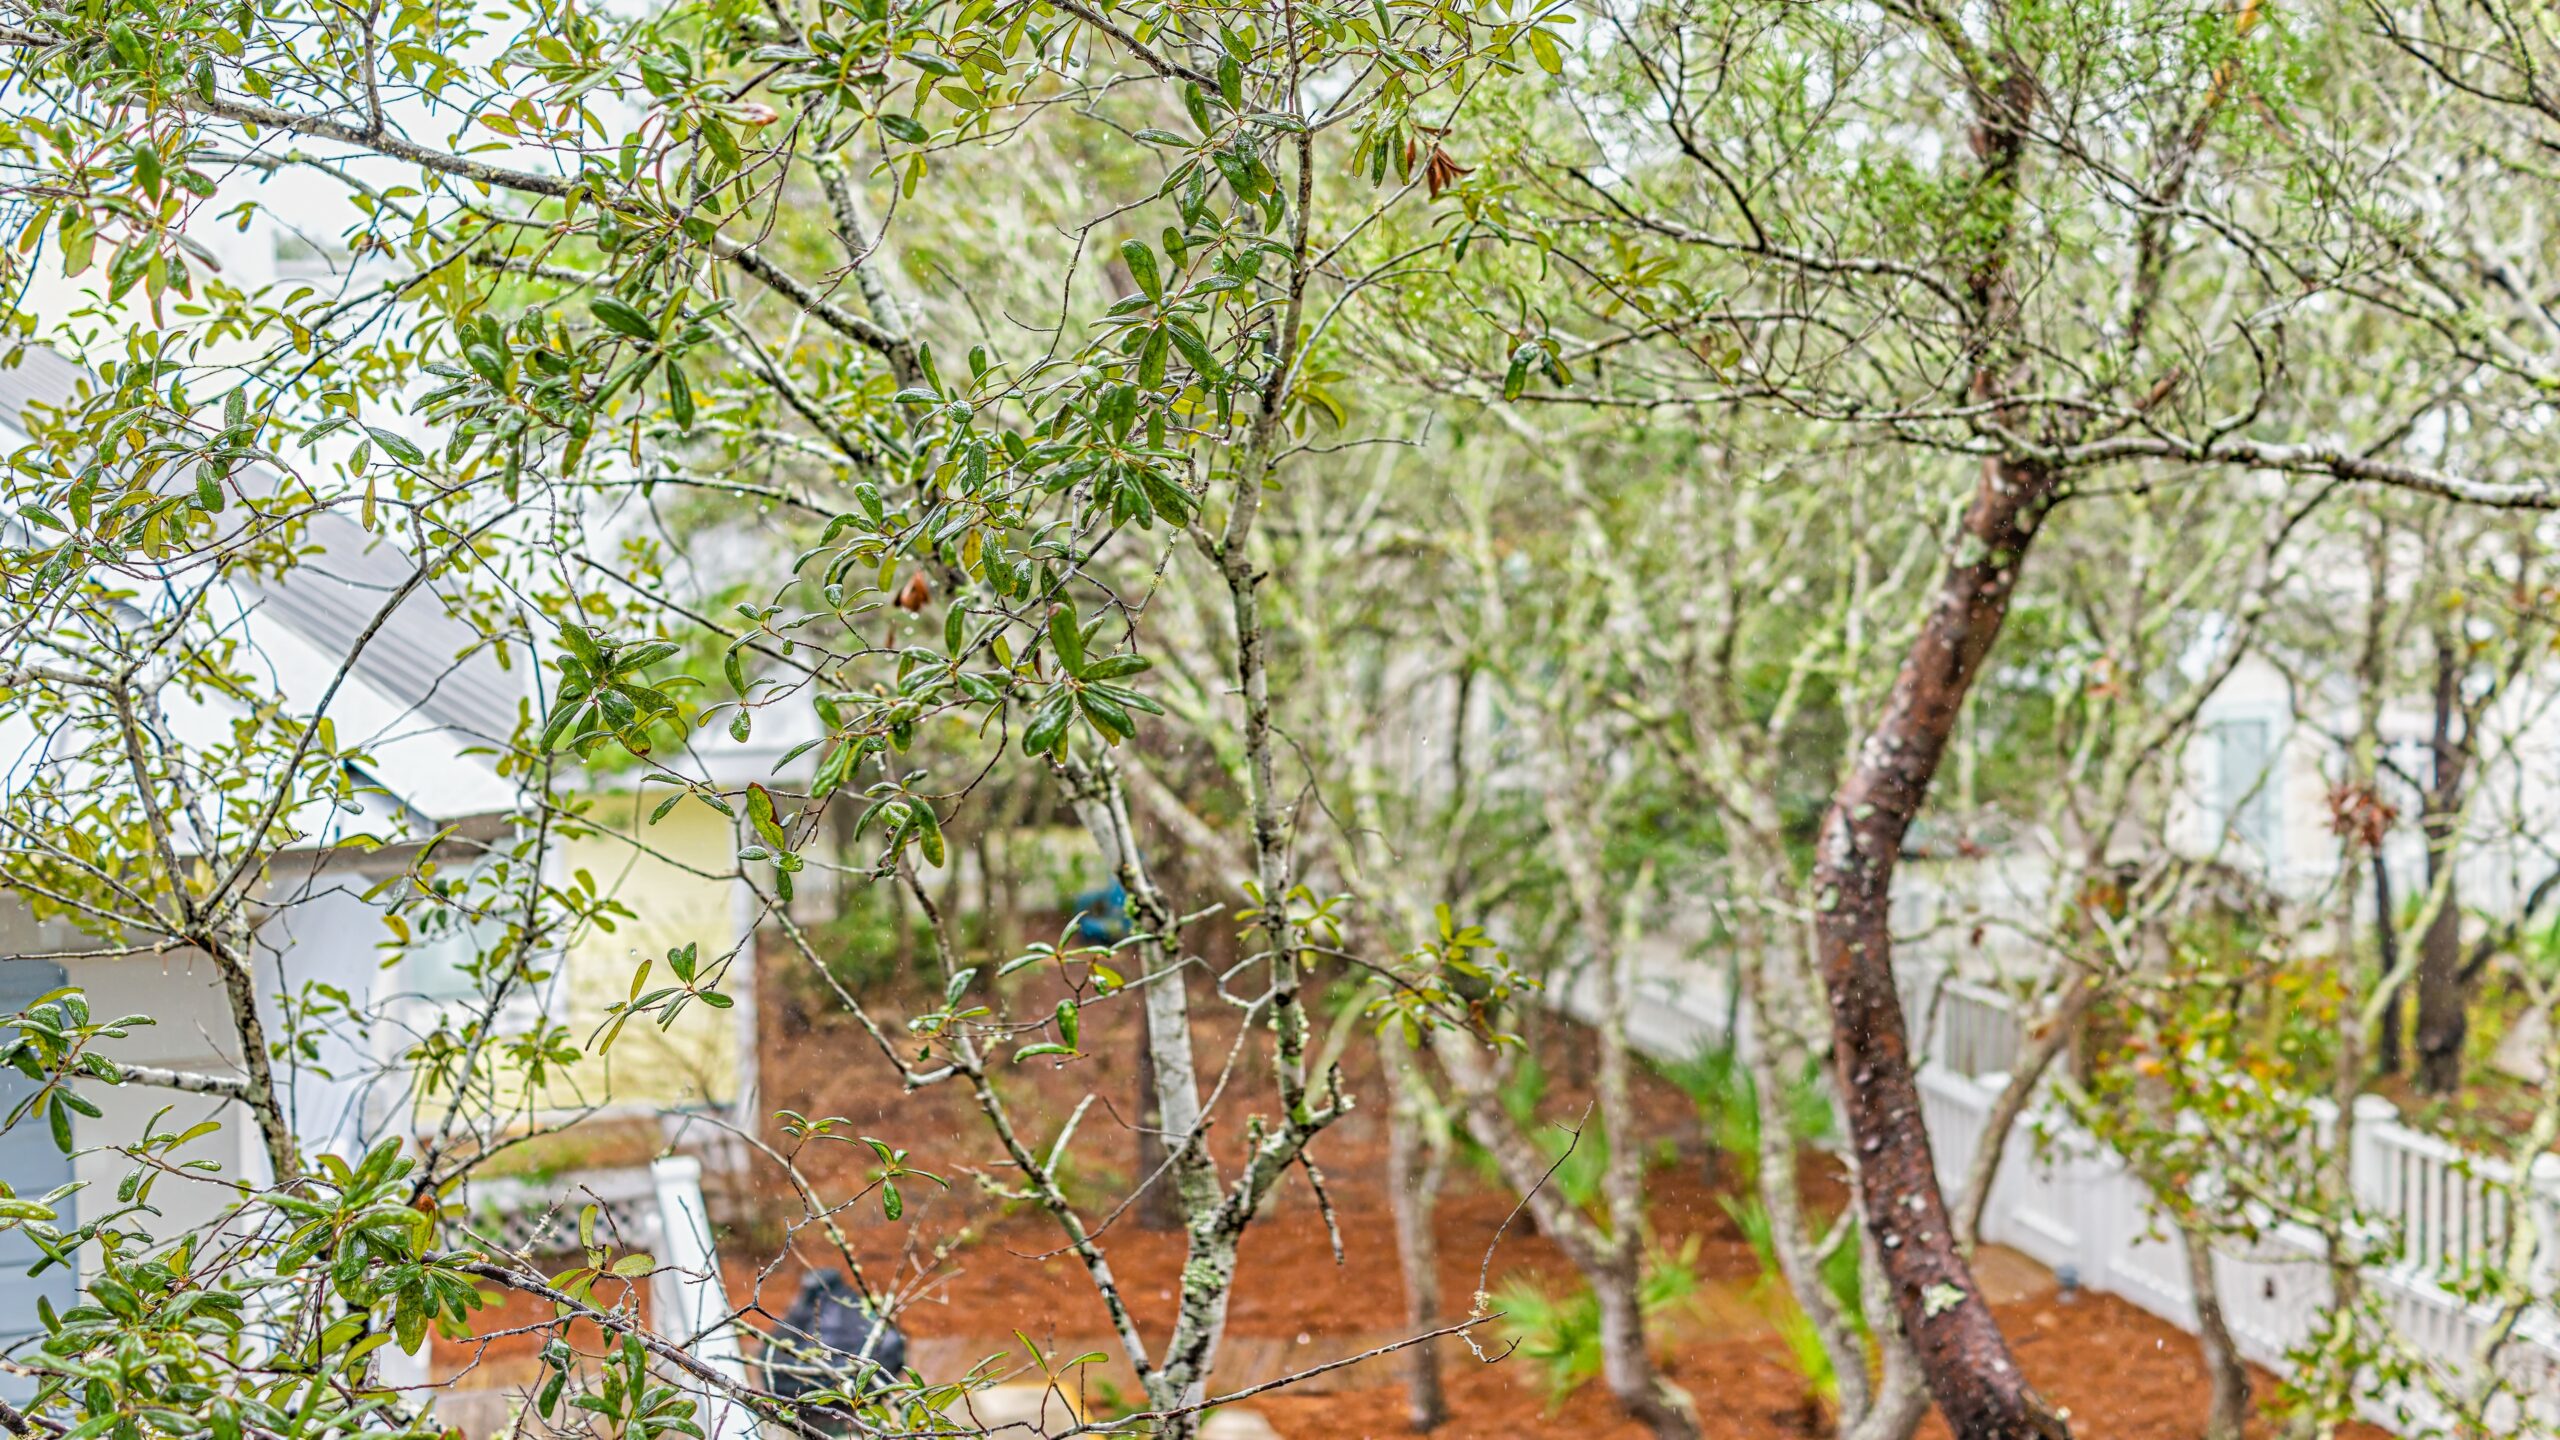 Raining weather with rain drops falling in Seaside, Florida with view from house home building terrace patio or balcony with Quercus geminata Sand Live Oak